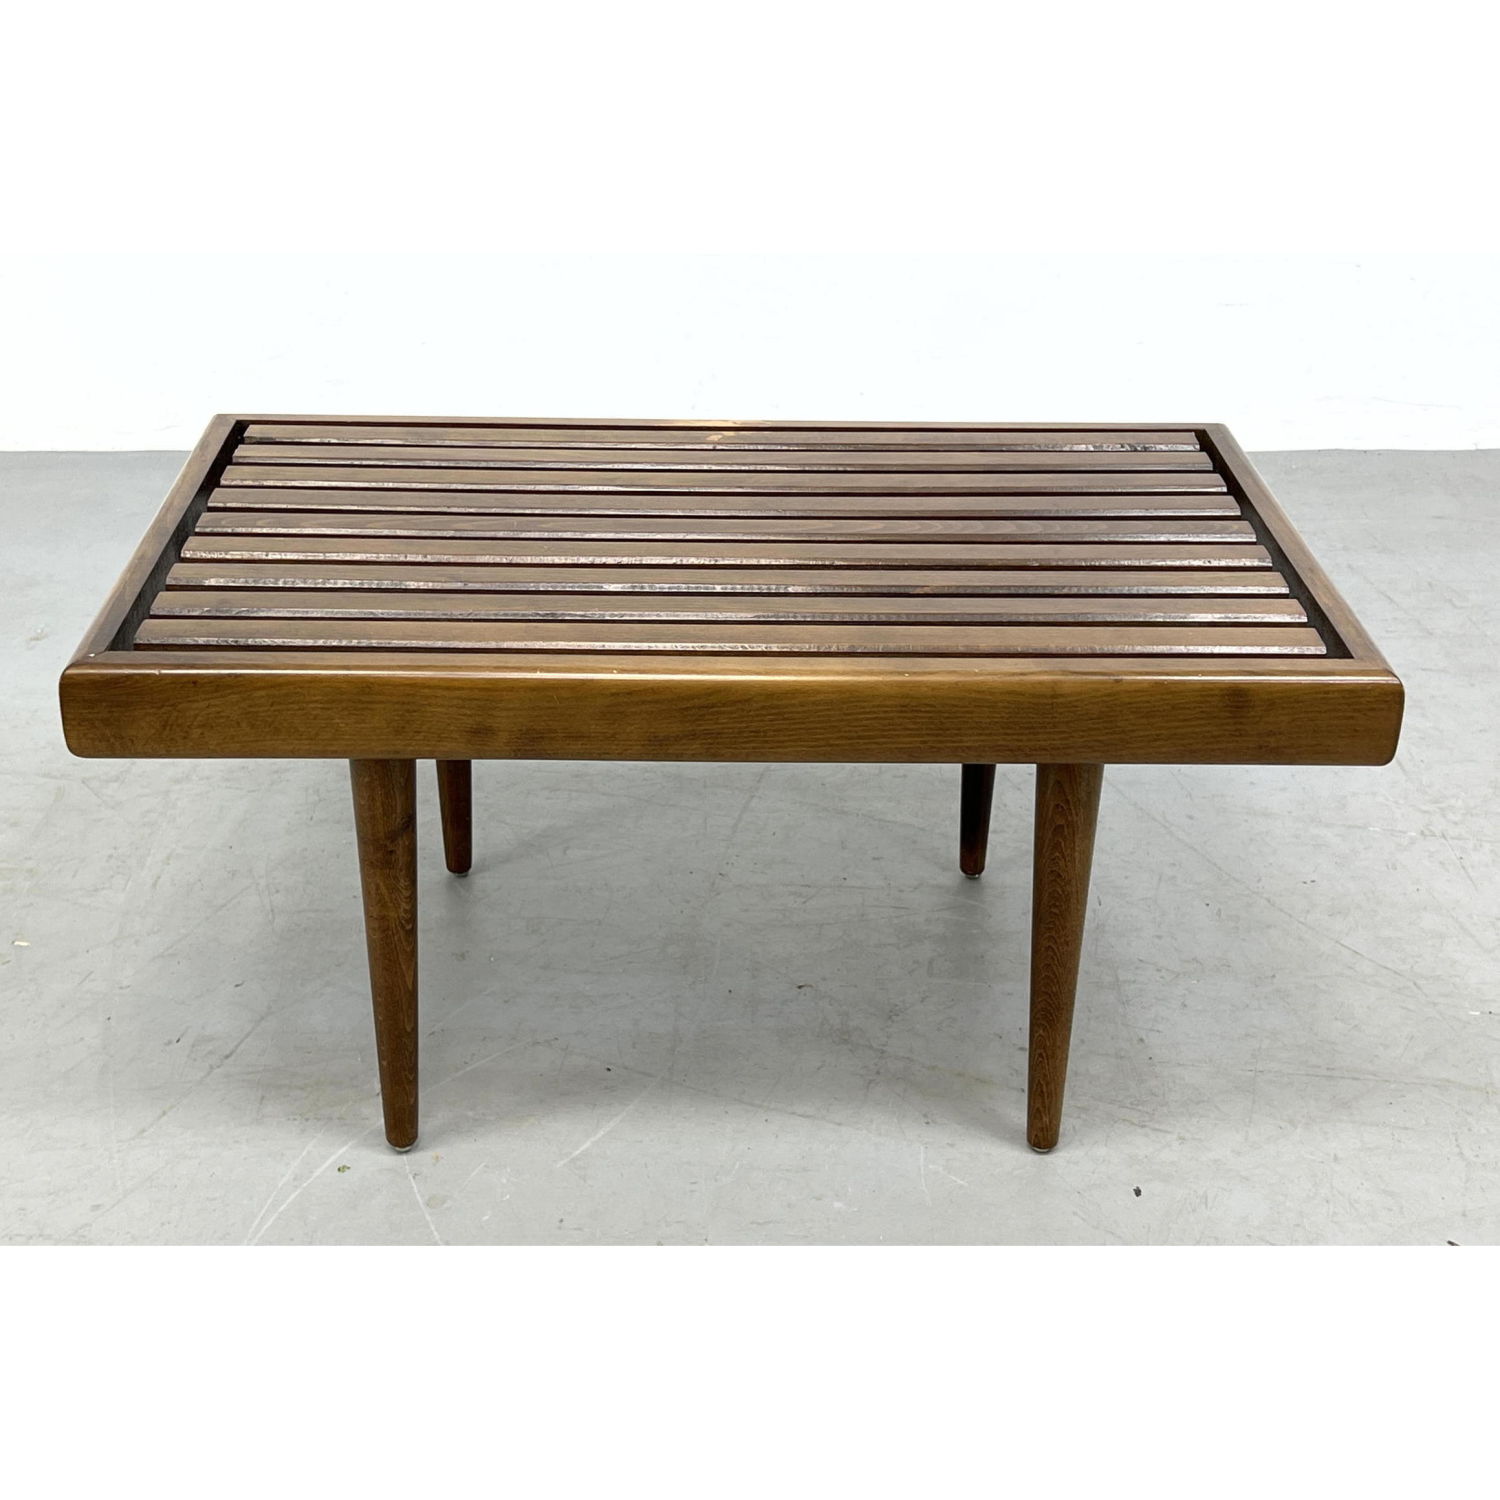 Small Slat Bench Coffee Table.